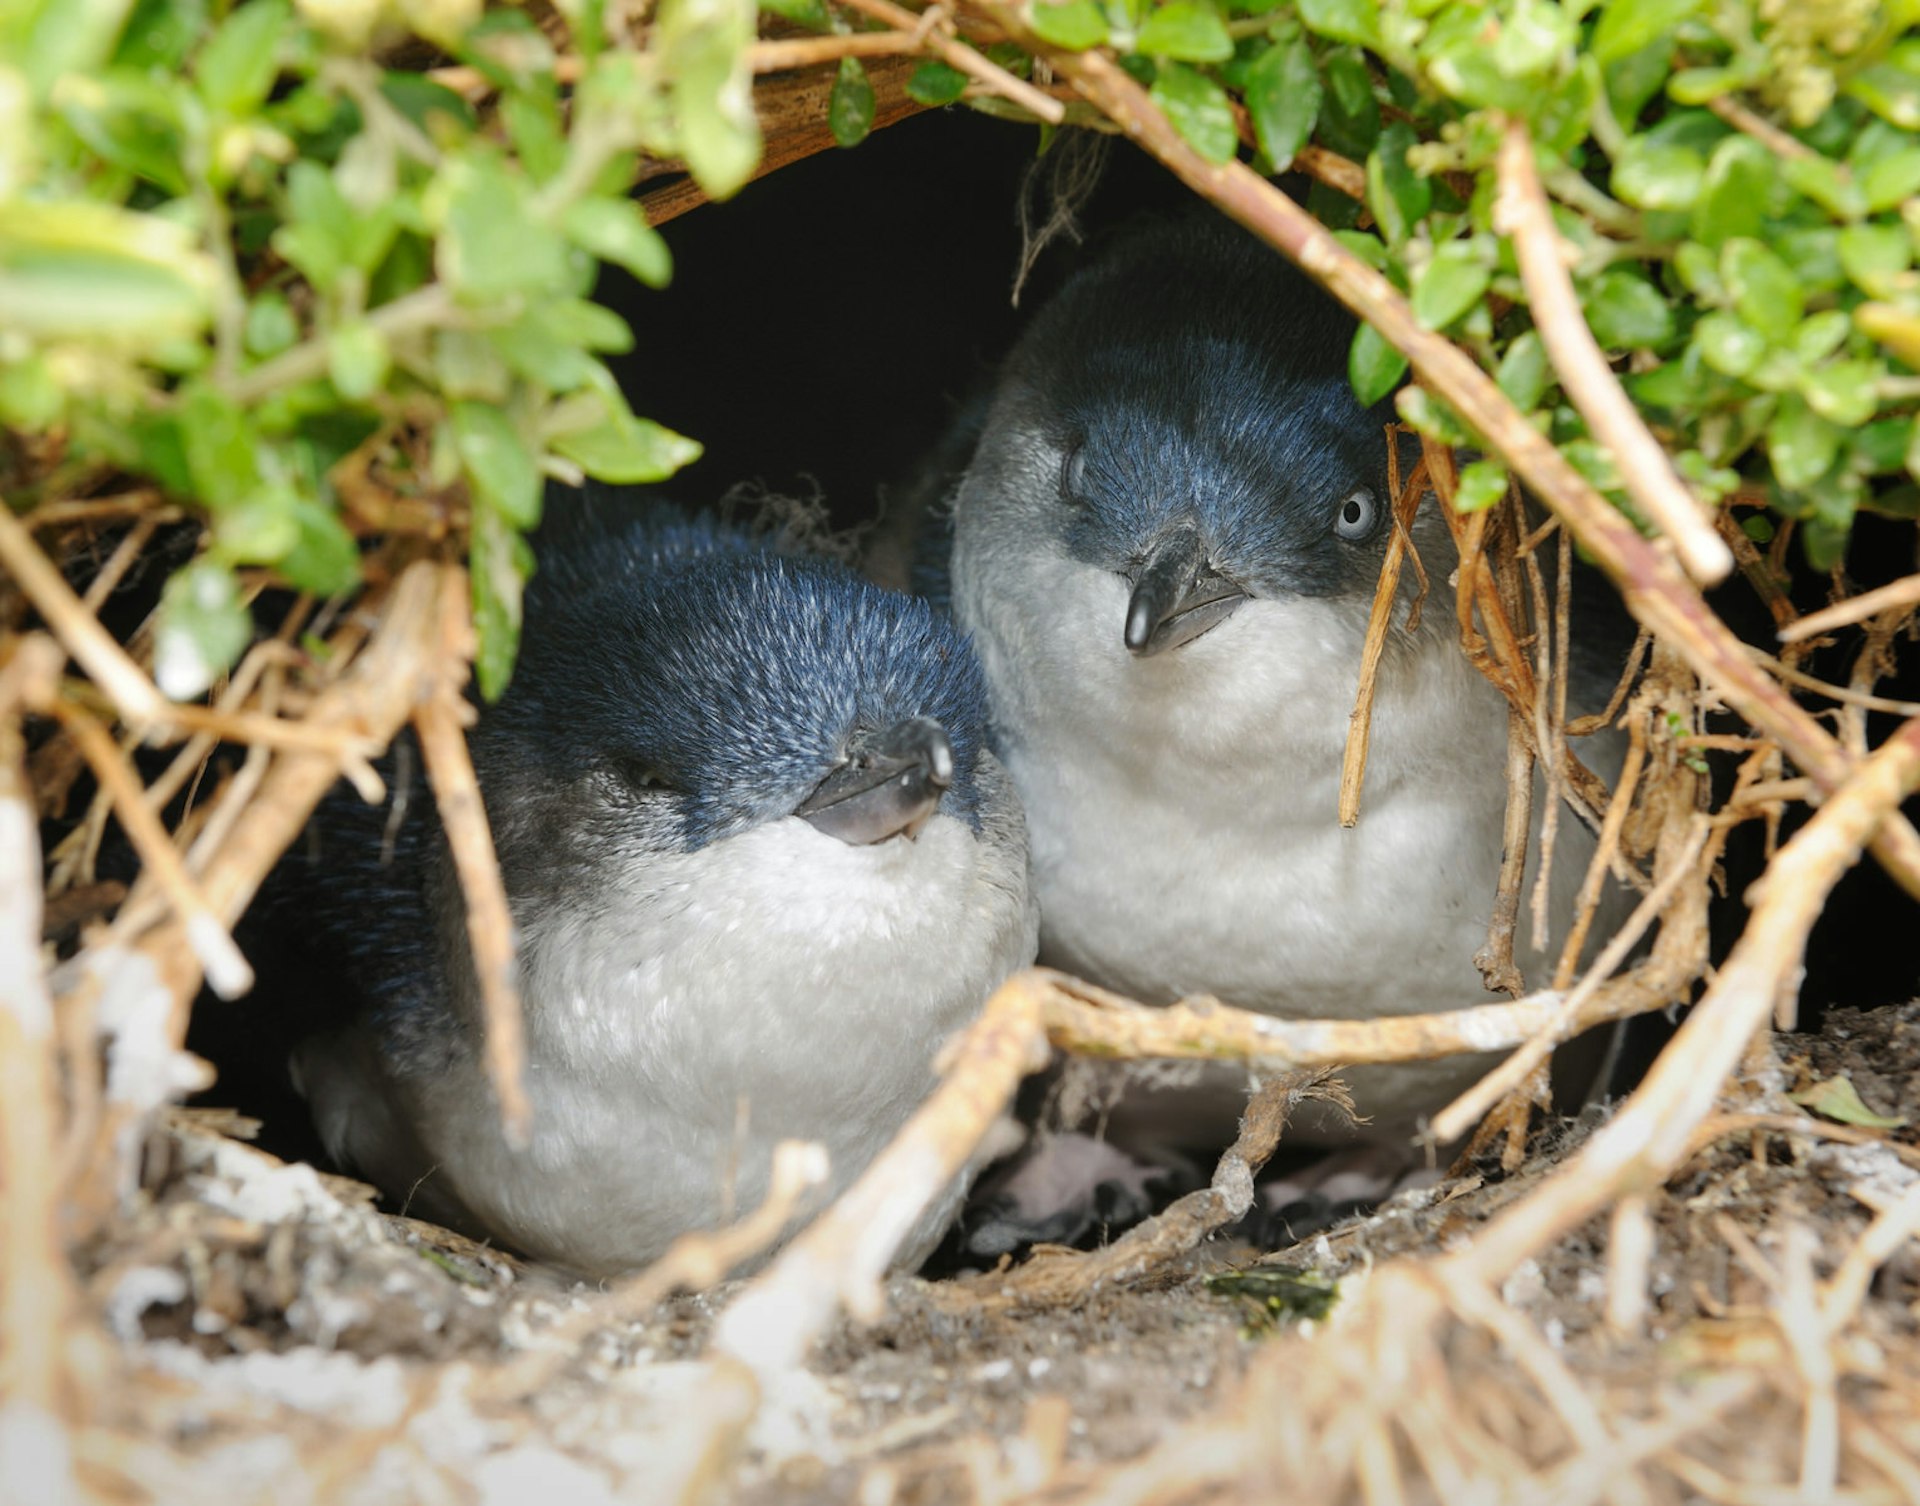 A pair of little penguins poking from a nest